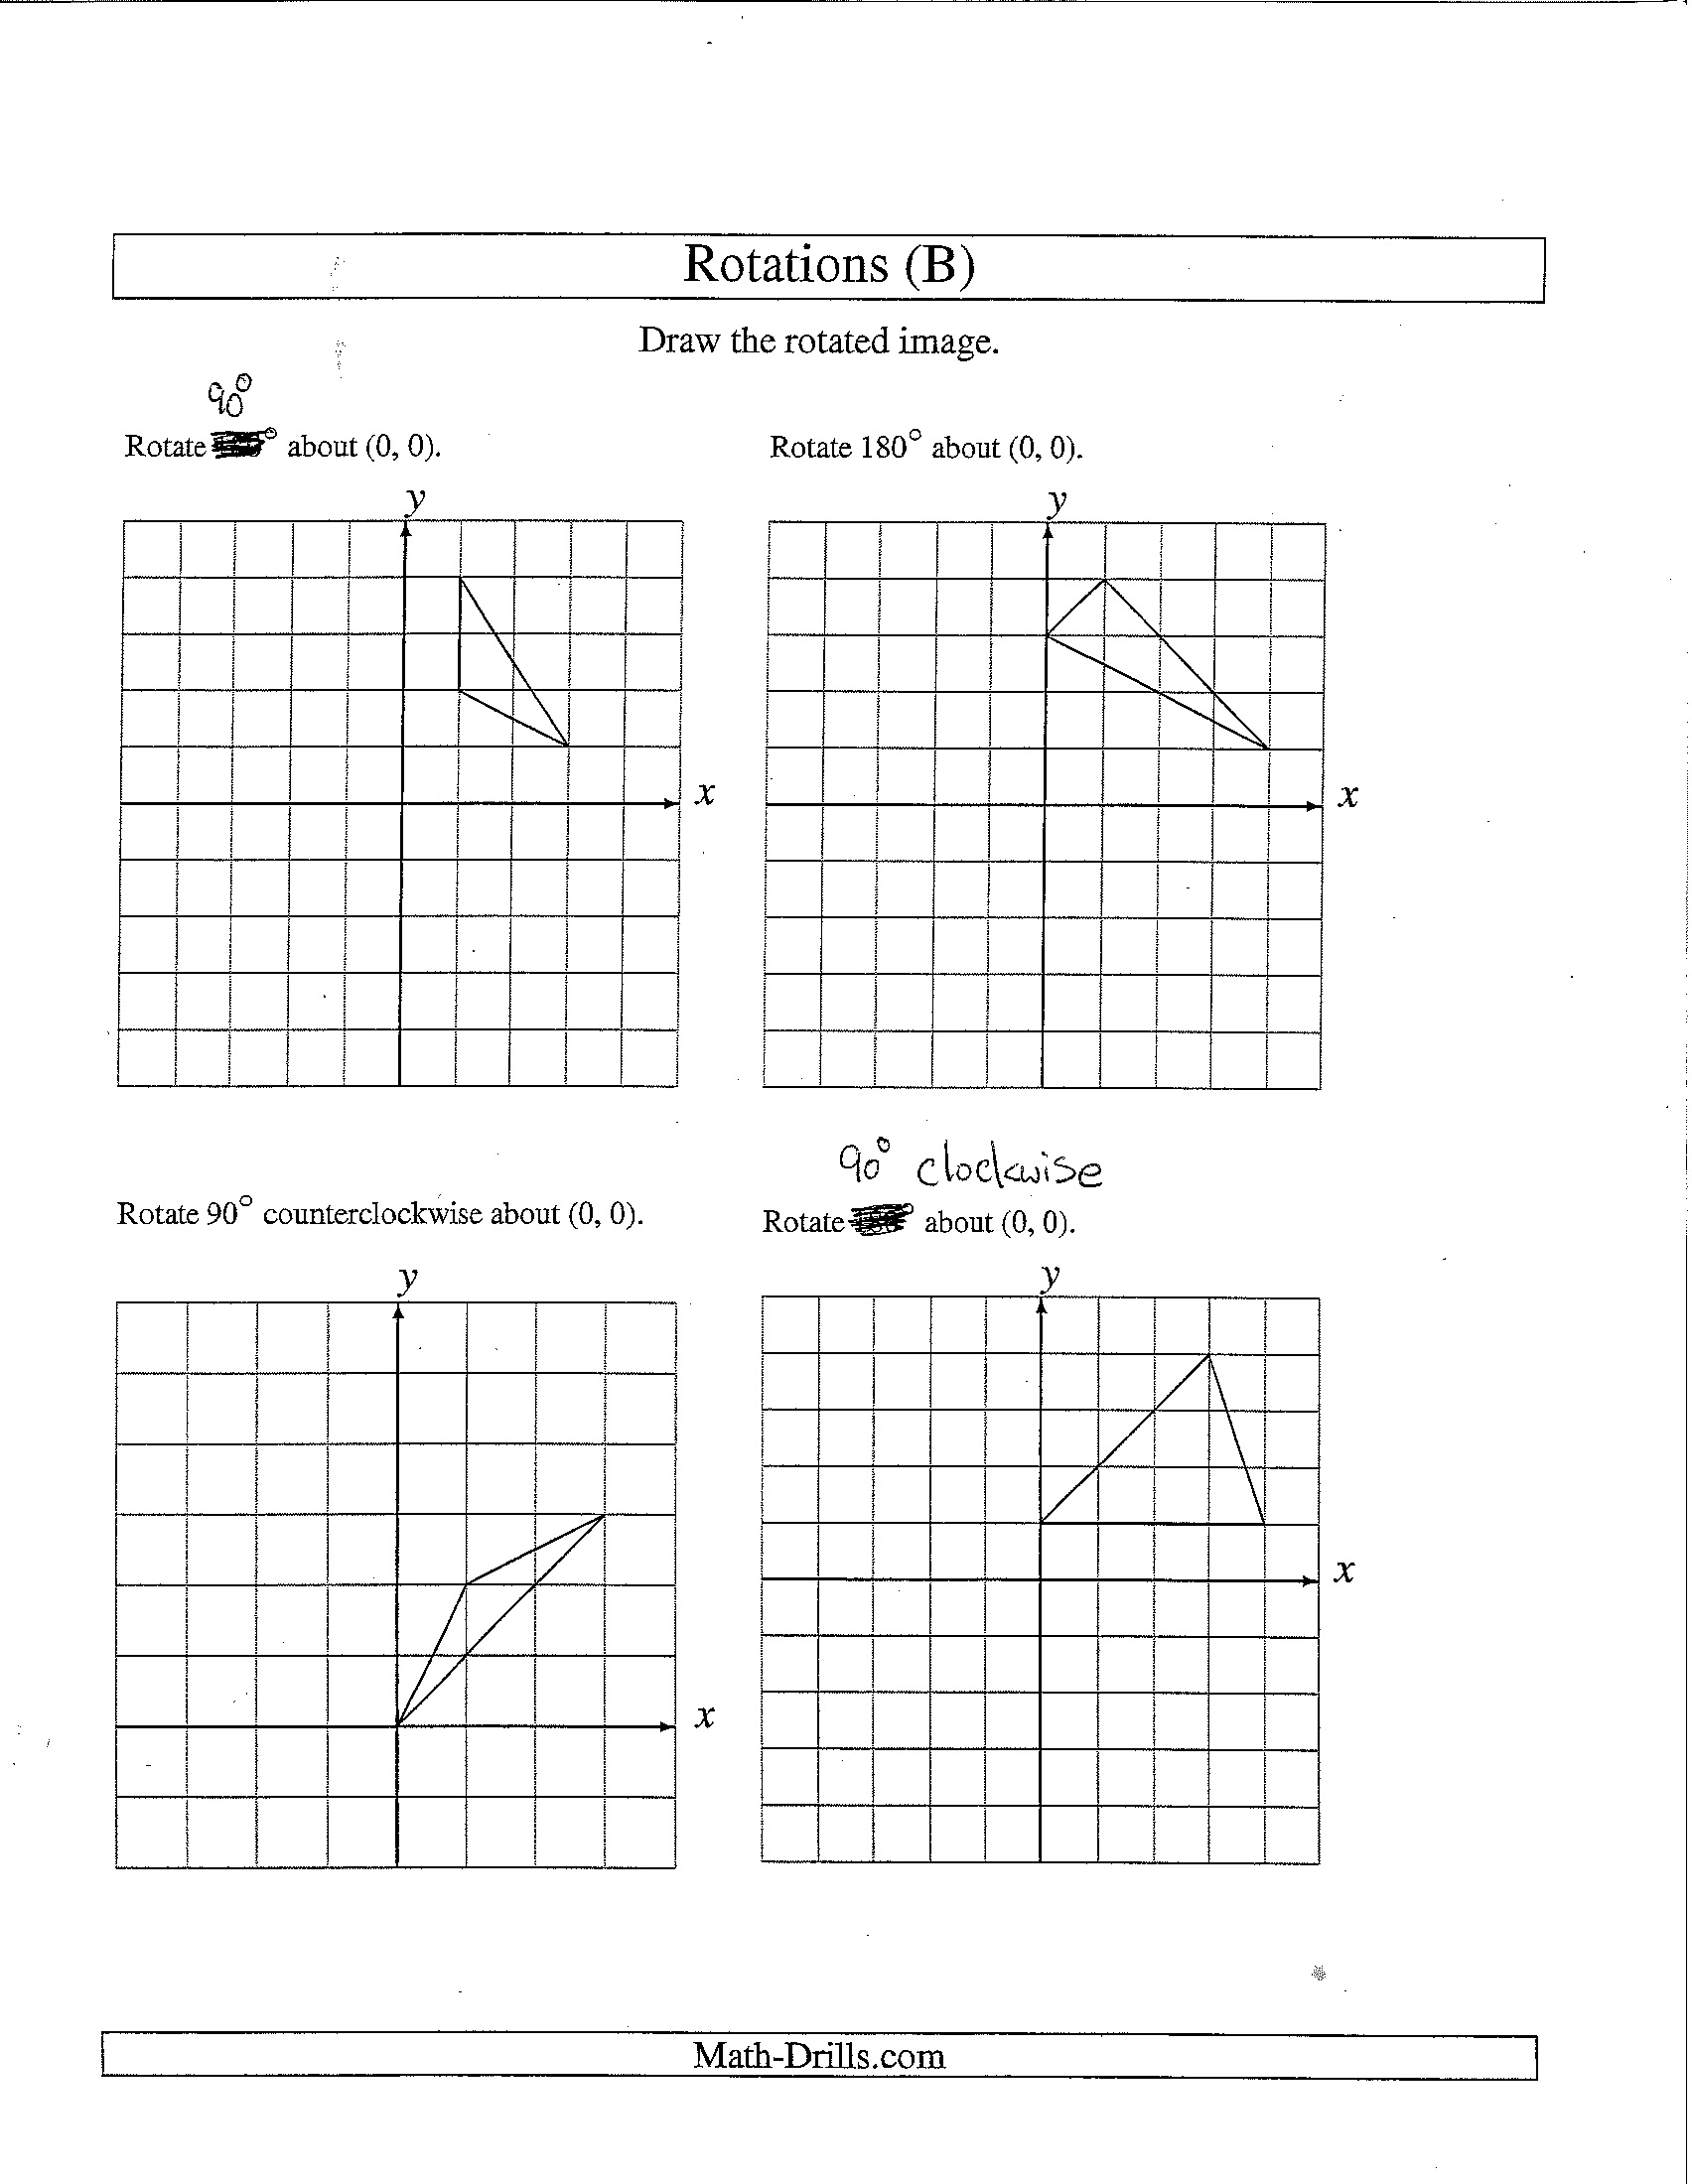 11 Best Images of Earth Rotation Worksheet 4th Grade ...